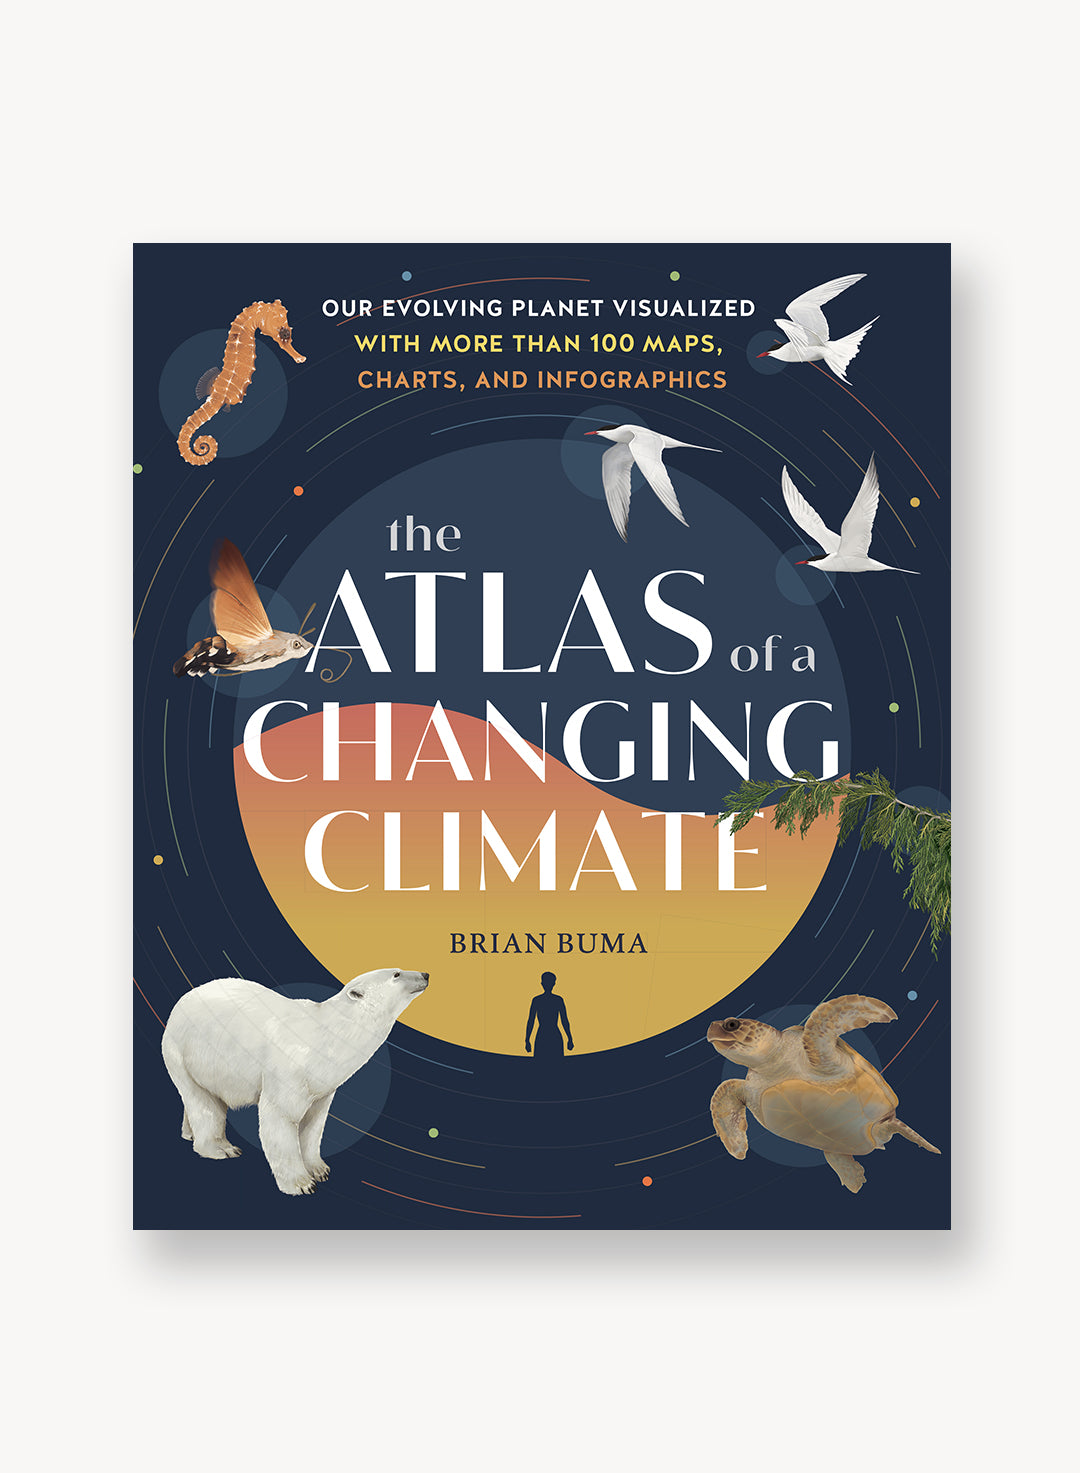 The Atlas of a Changing Climate